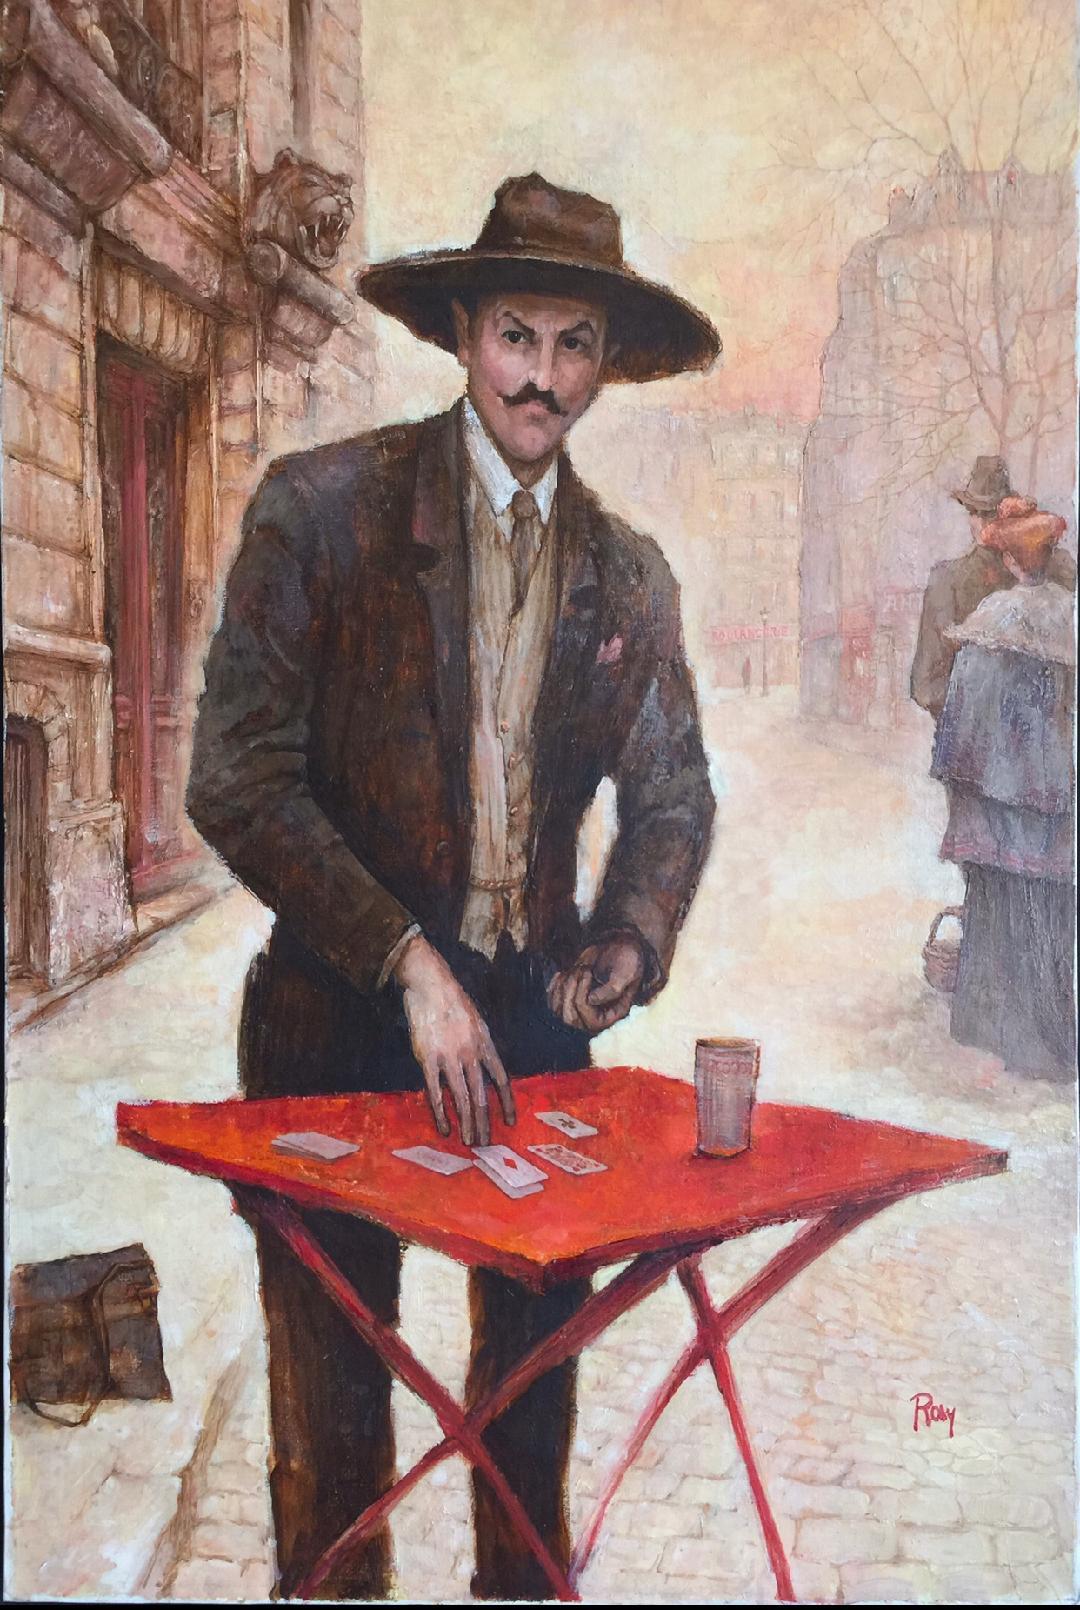 The cards player - Painting by Rodica Iliesco